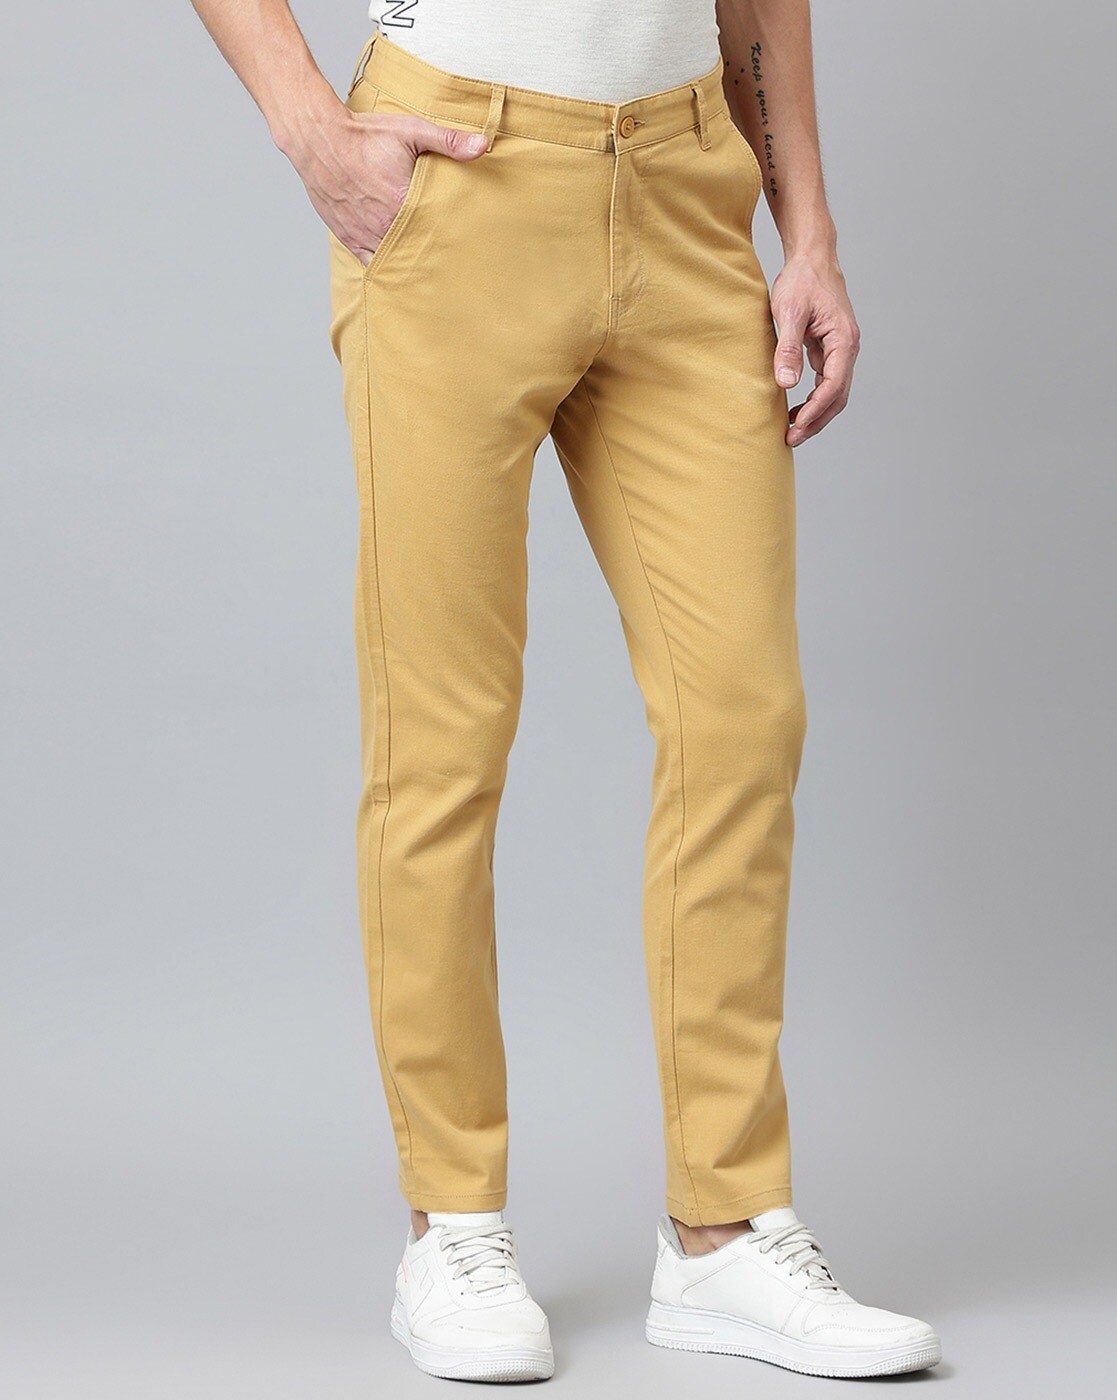 What to wear with mustard pants? | Dress Online